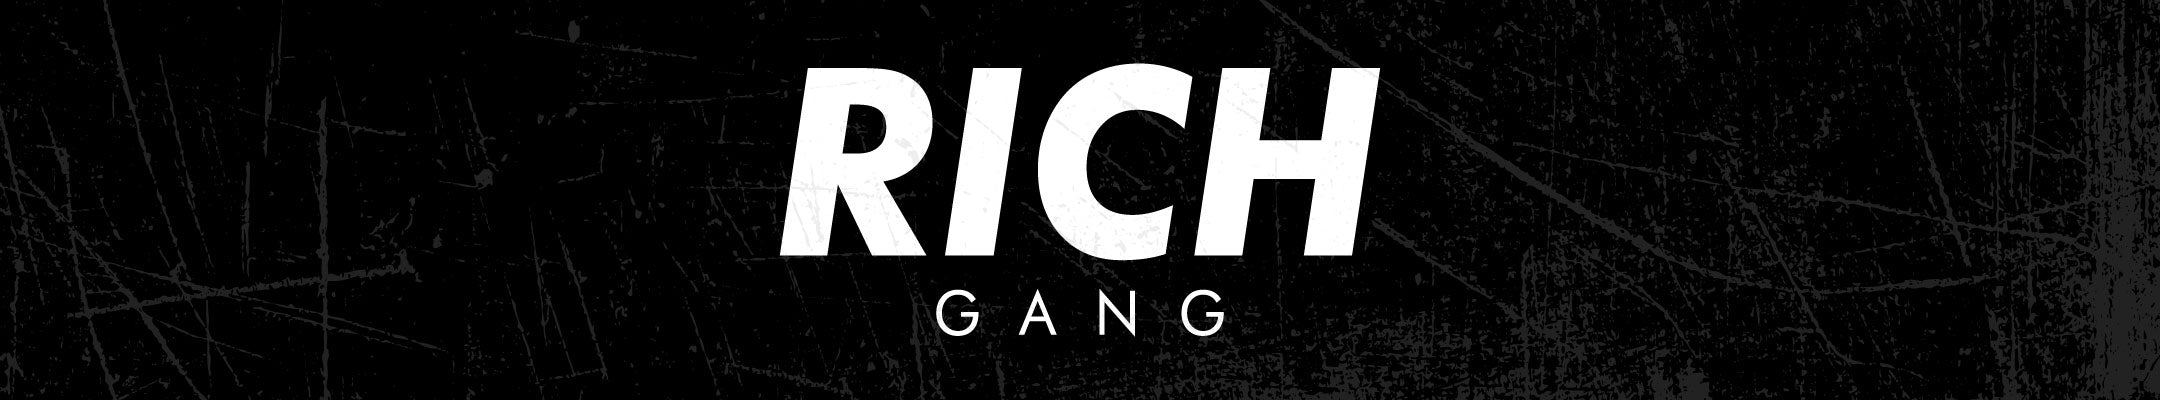 RICH GANG iPhone 14 Pro Max